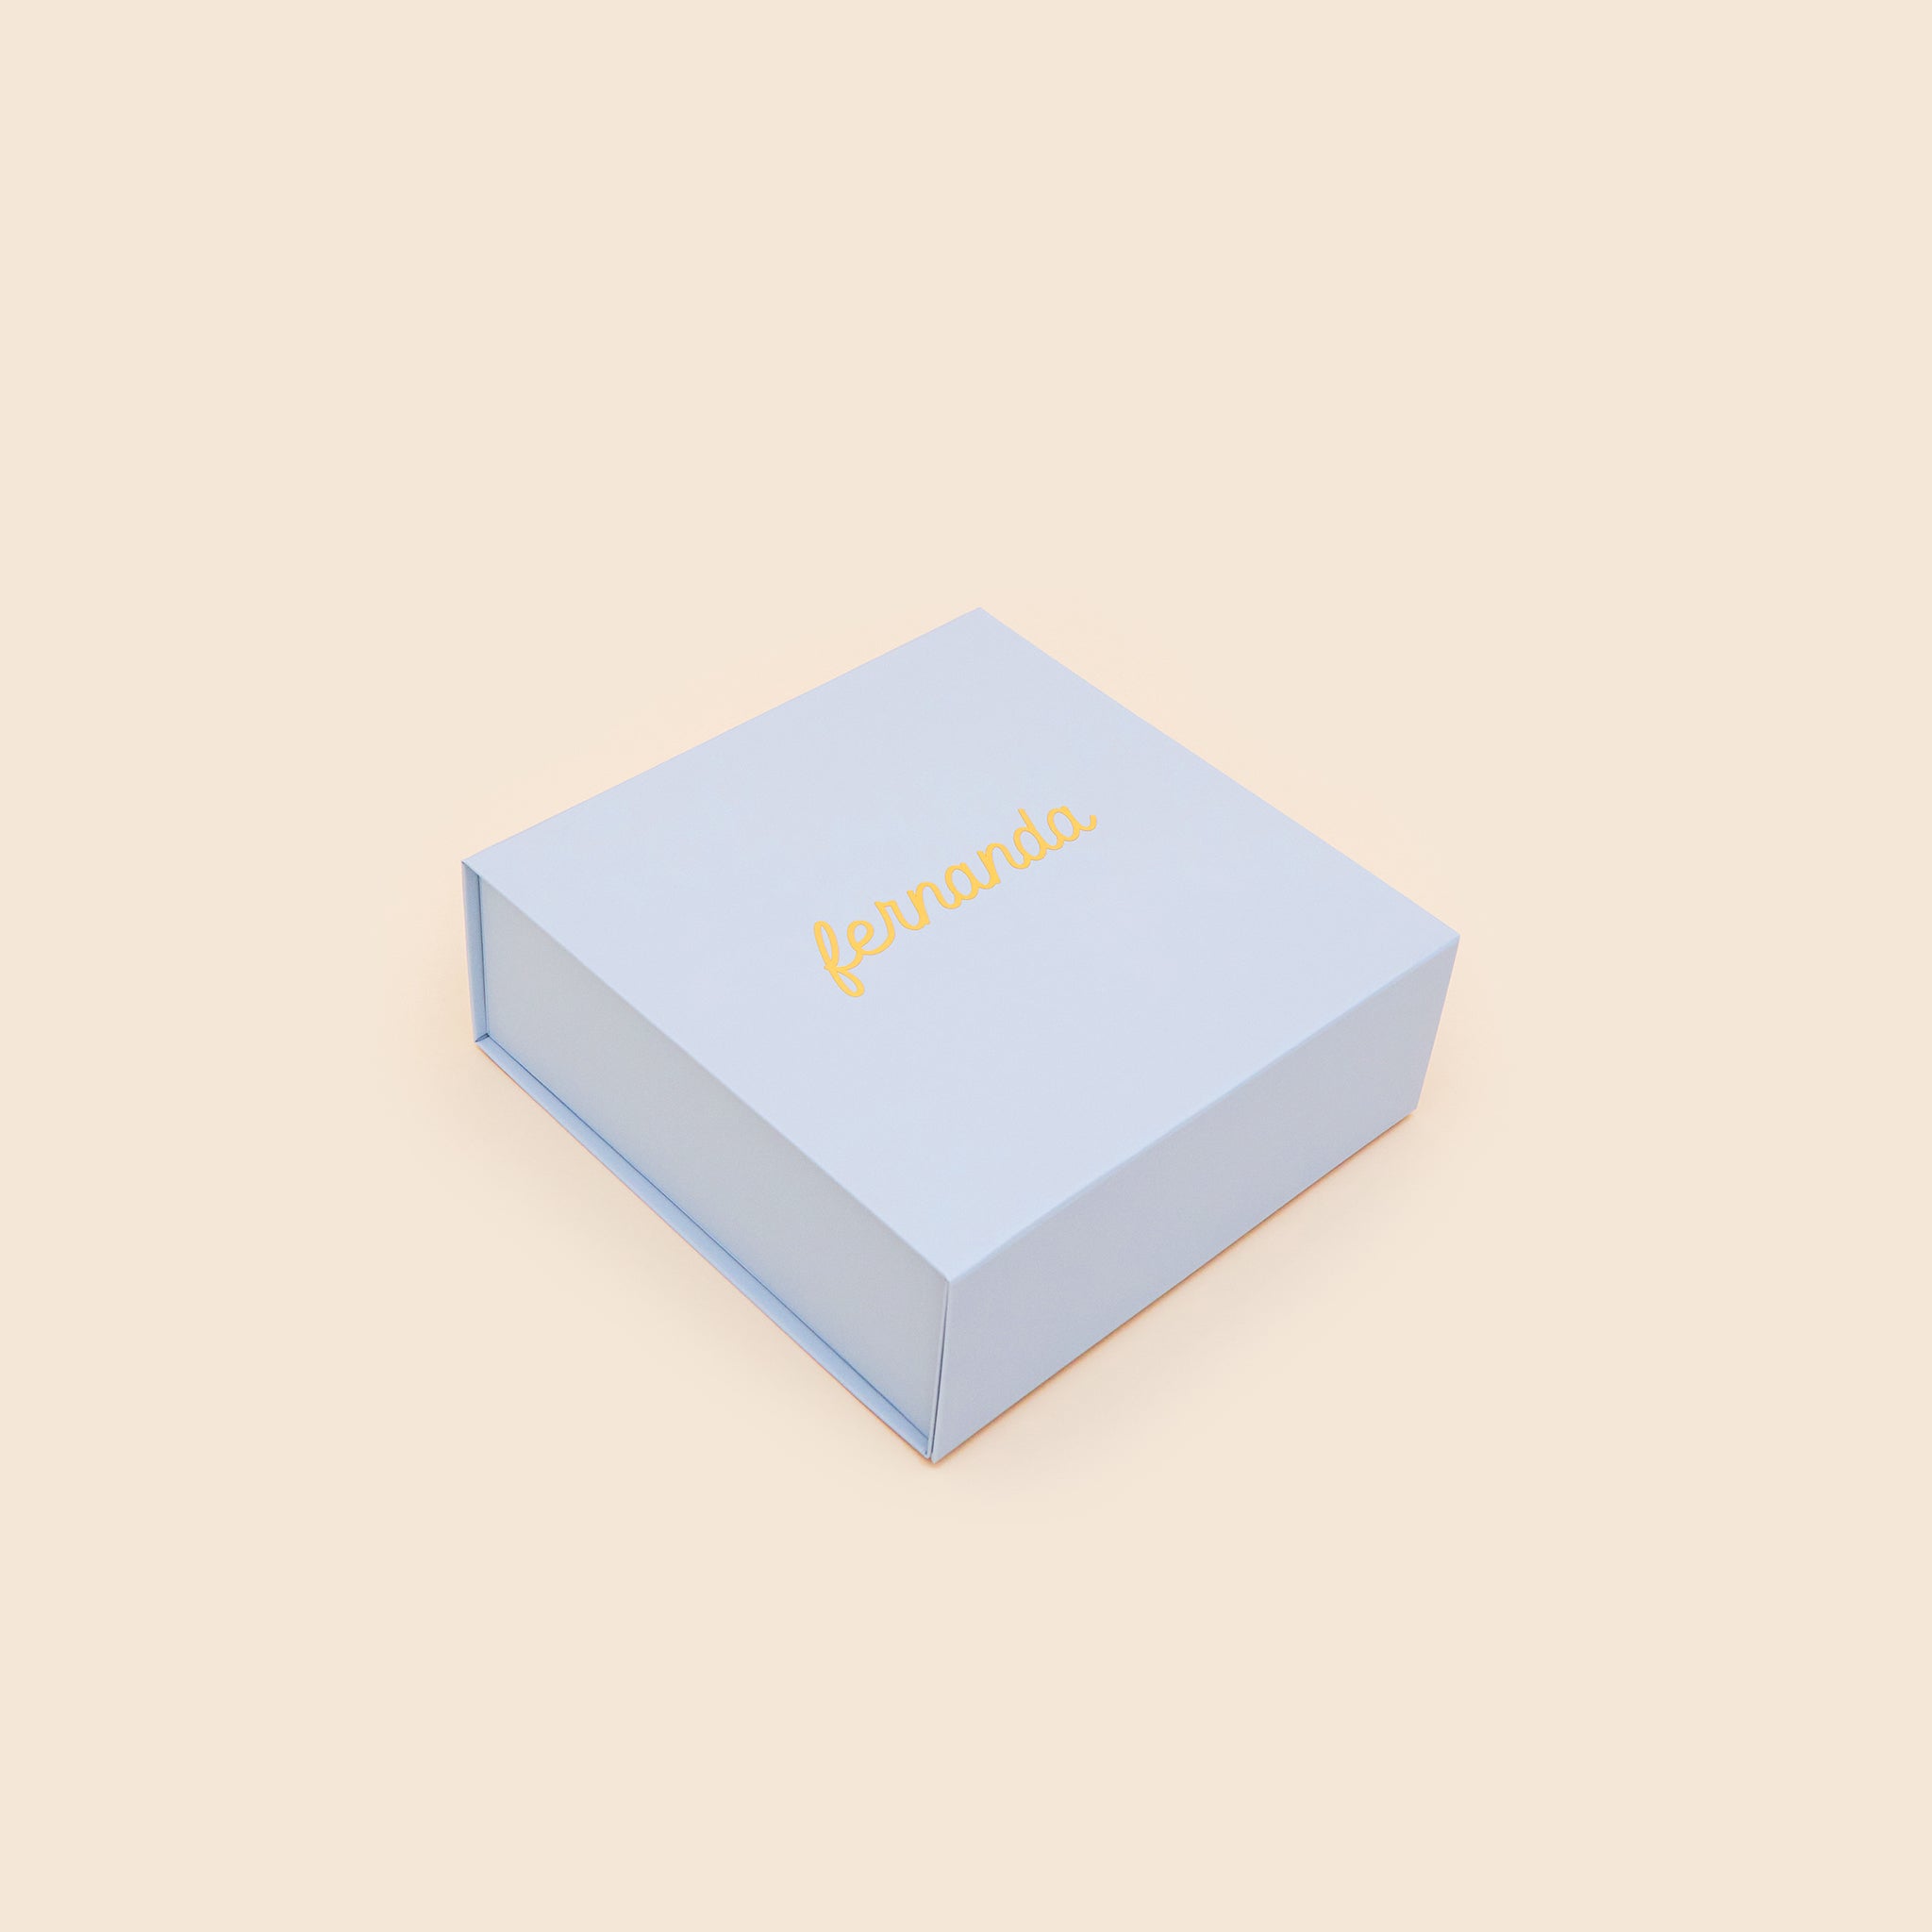 Personalized Proposal Box in dusty blue, top view